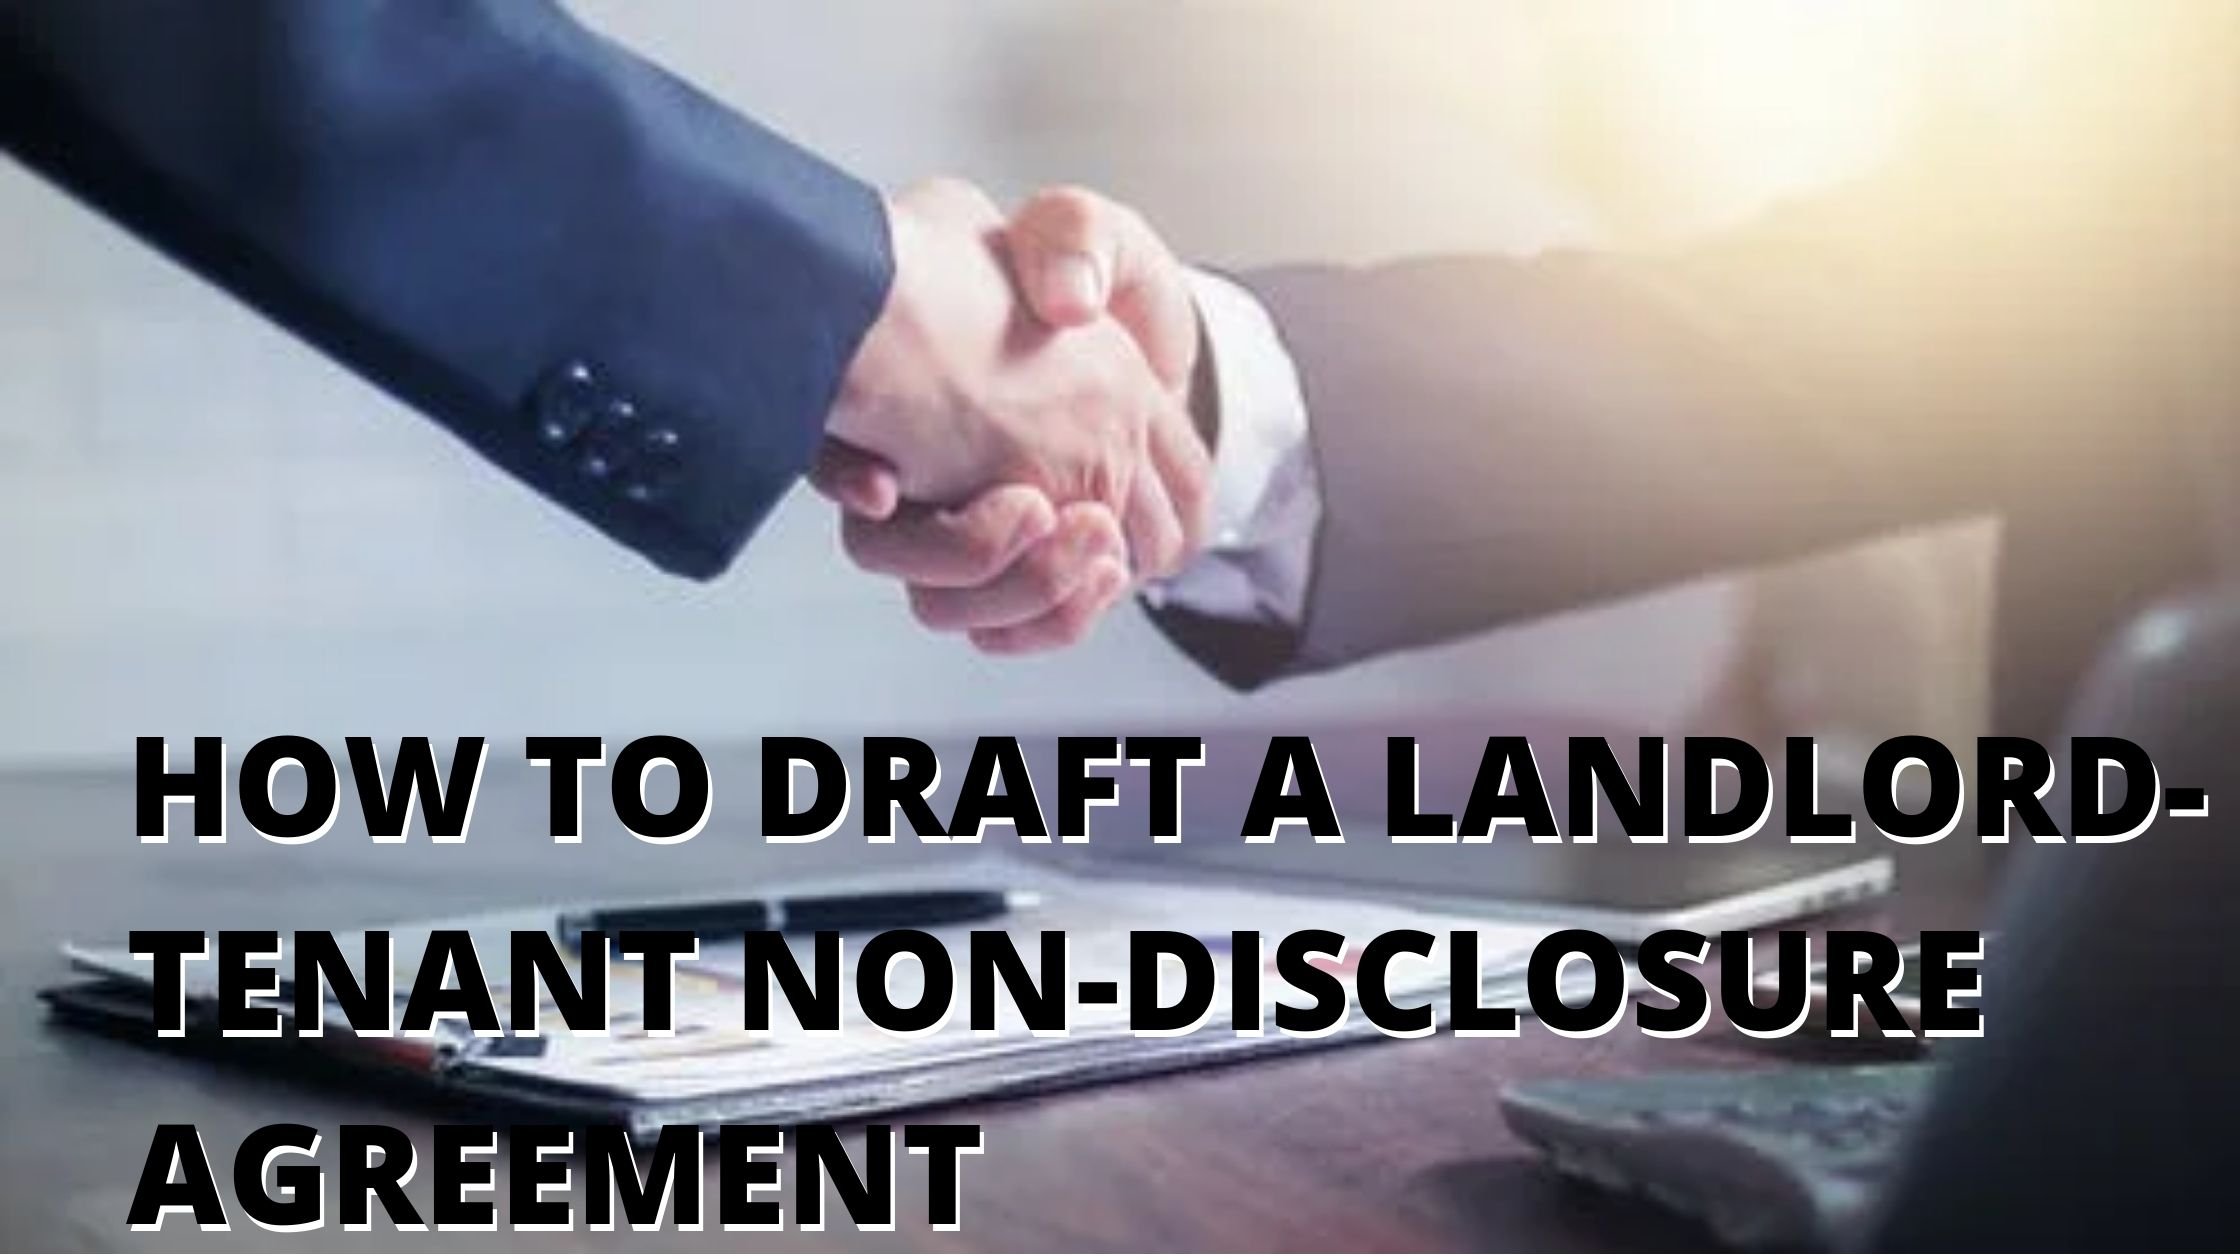 HOW TO DRAFT A LANDLORD-TENANT NON-DISCLOSURE AGREEMENT